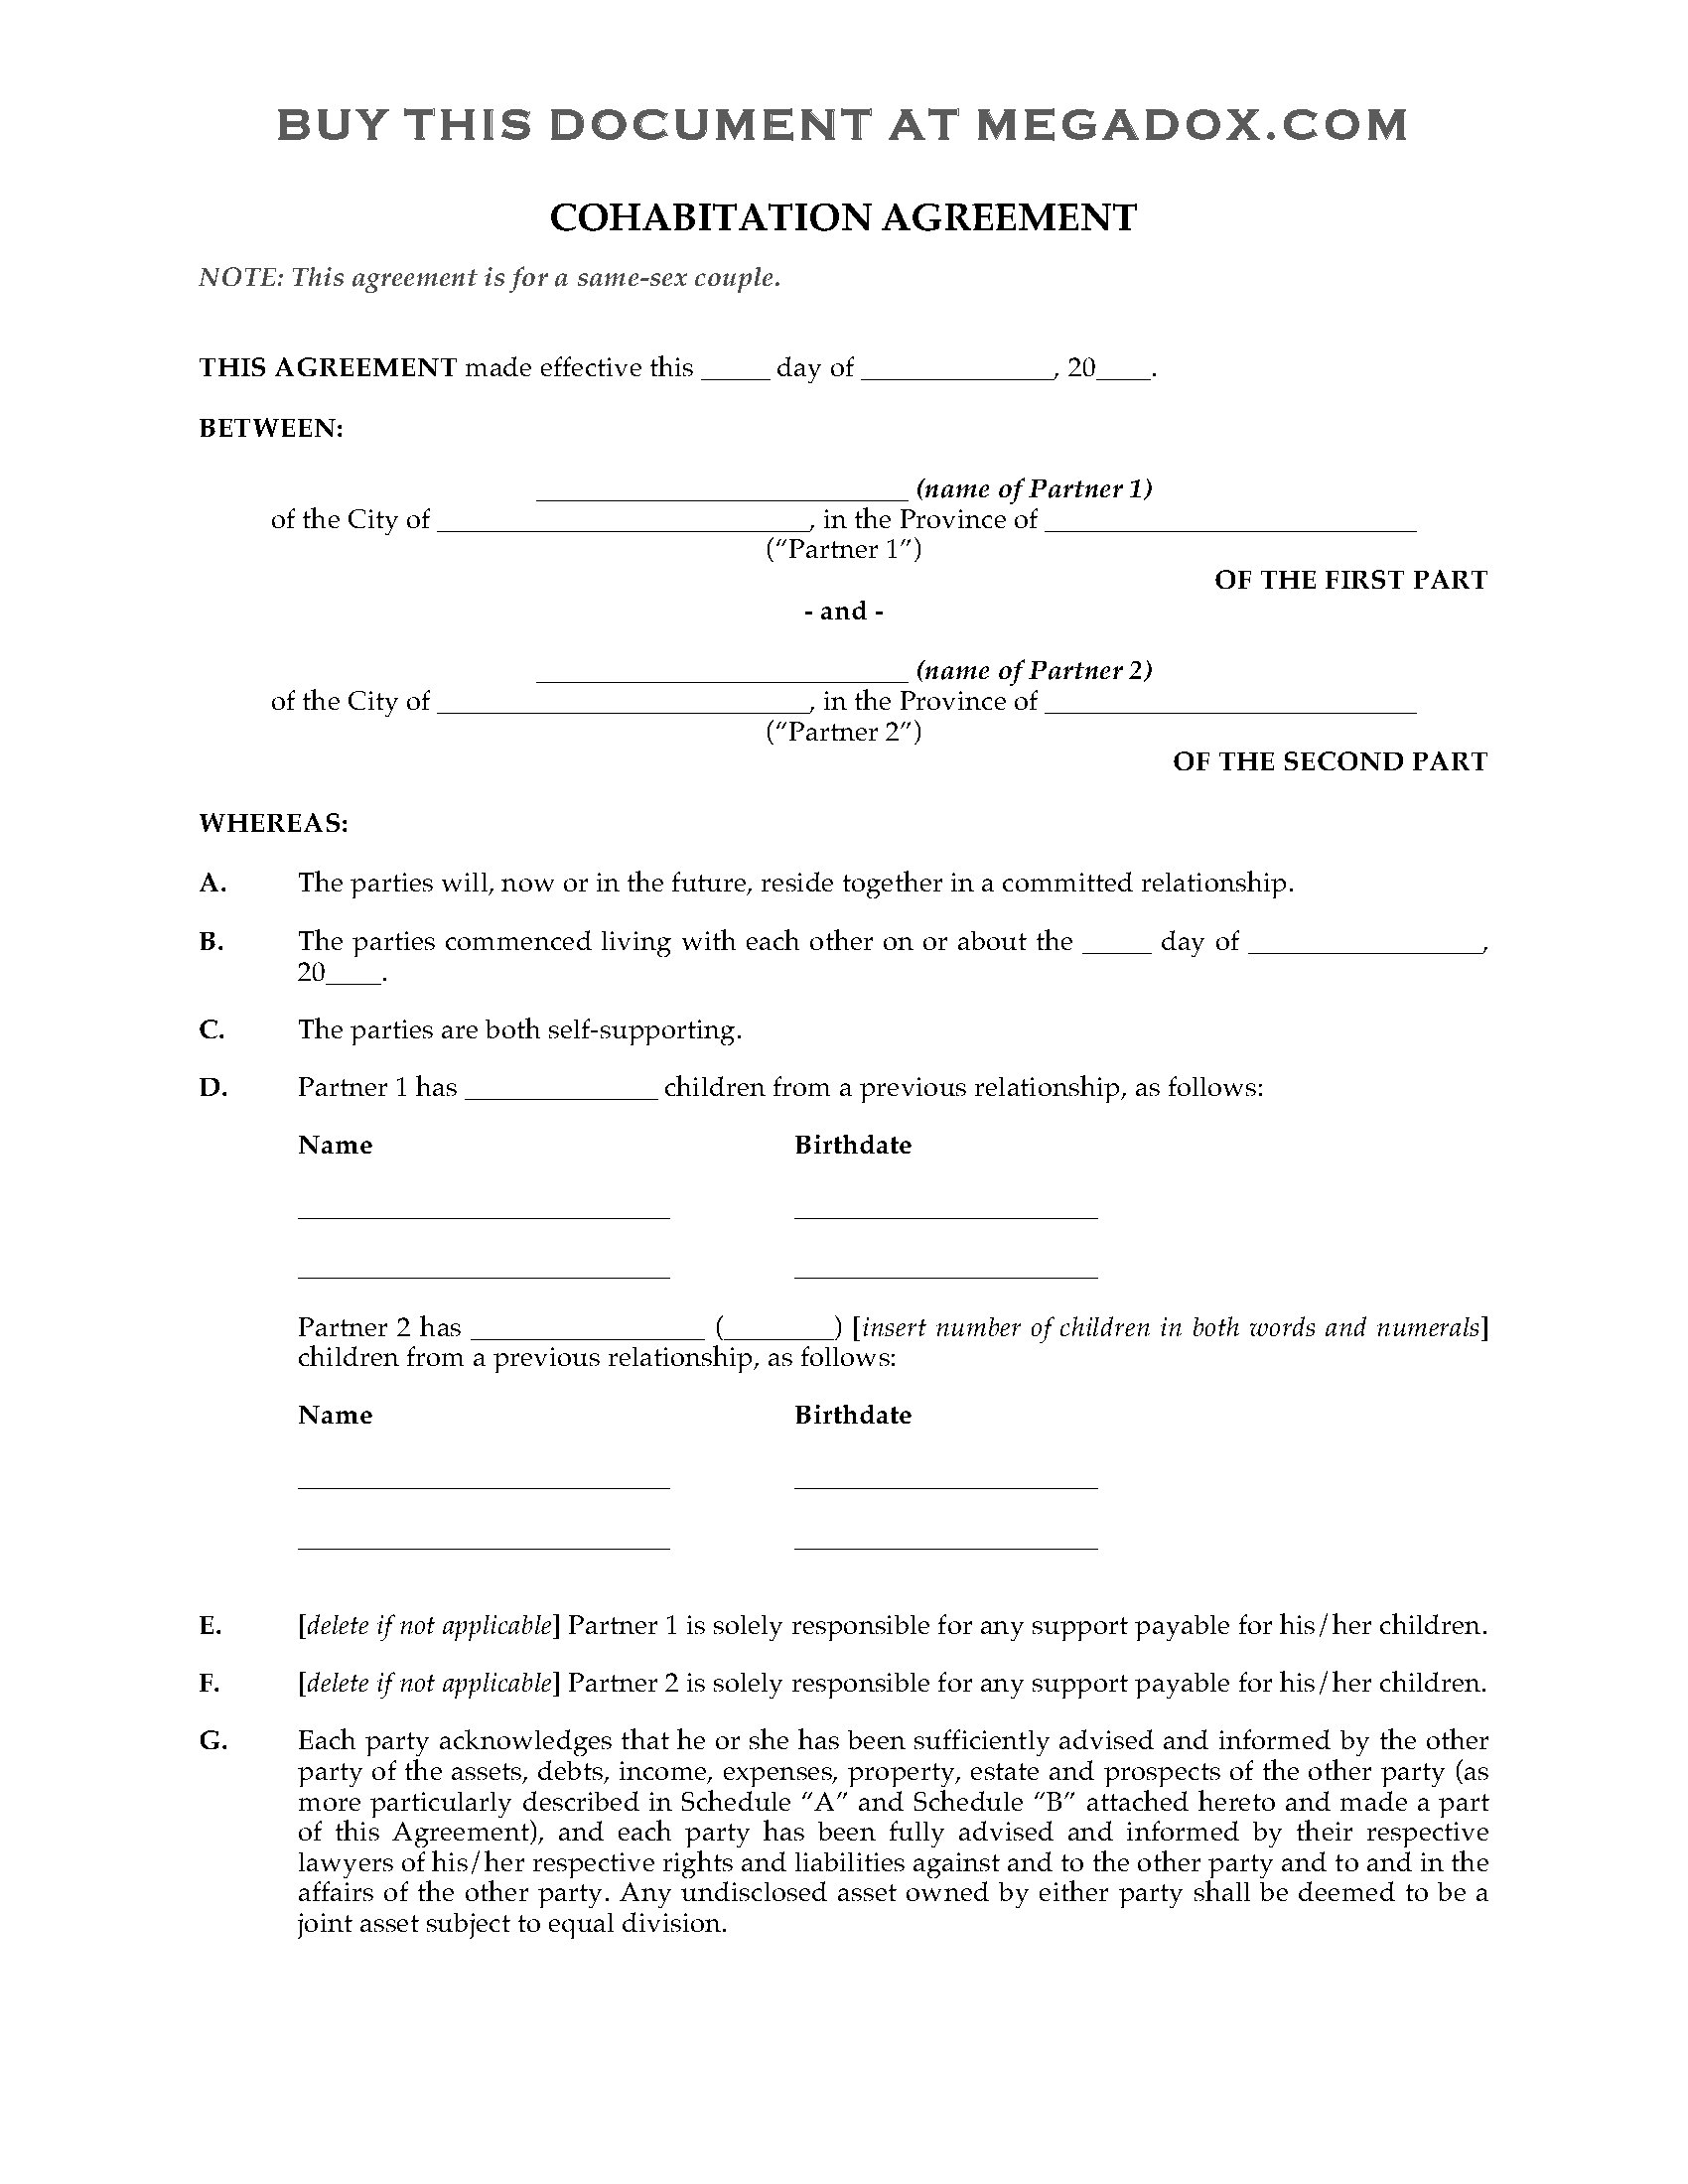 Canada Cohabitation Agreement for Same Sex Couple  Legal Forms Within free cohabitation agreement template